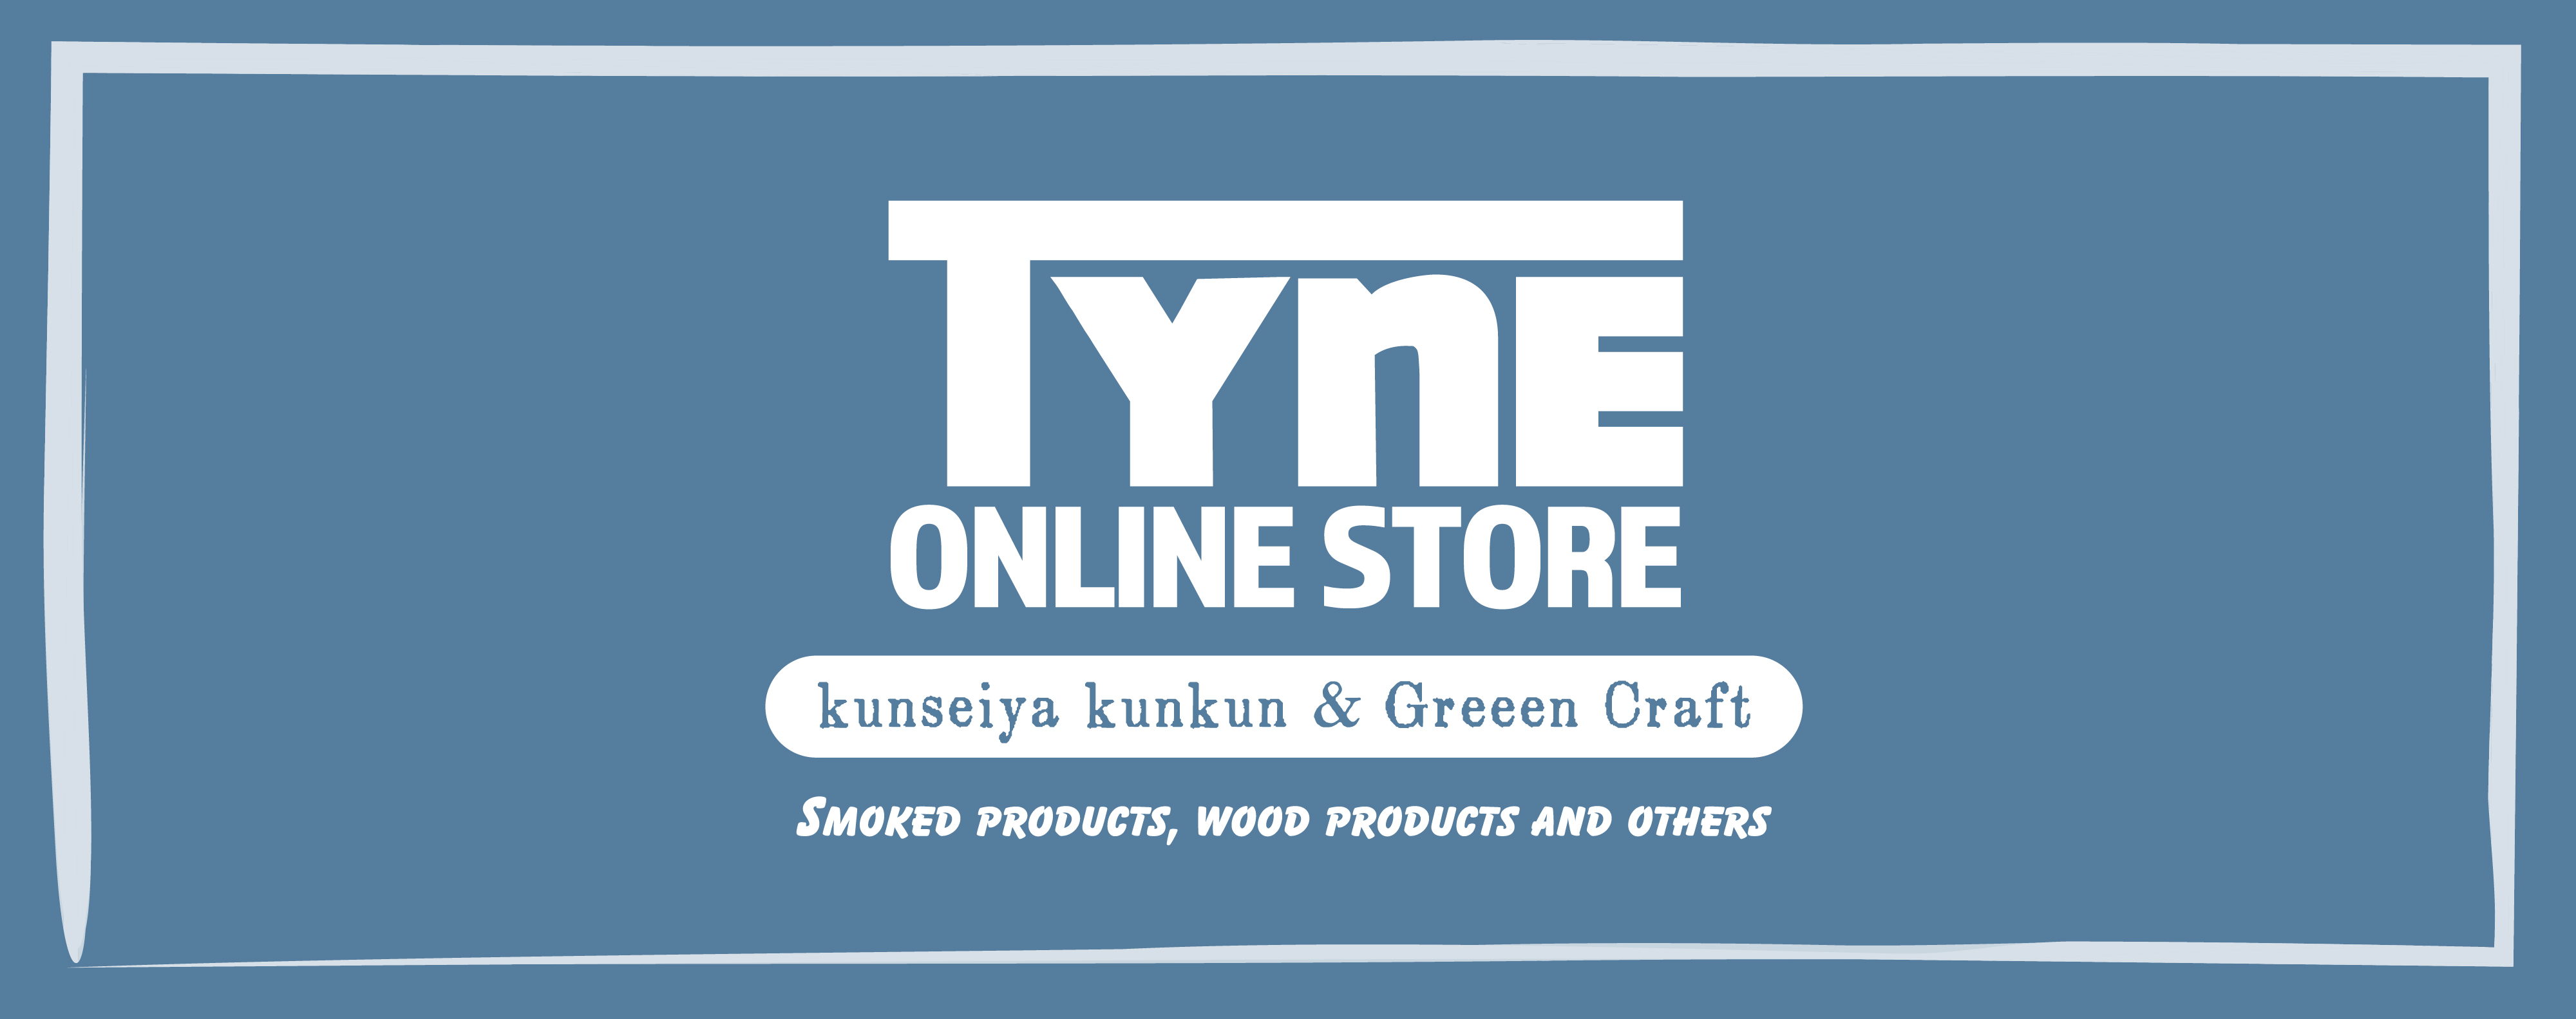 We are "TYNE ONLINE STORE"